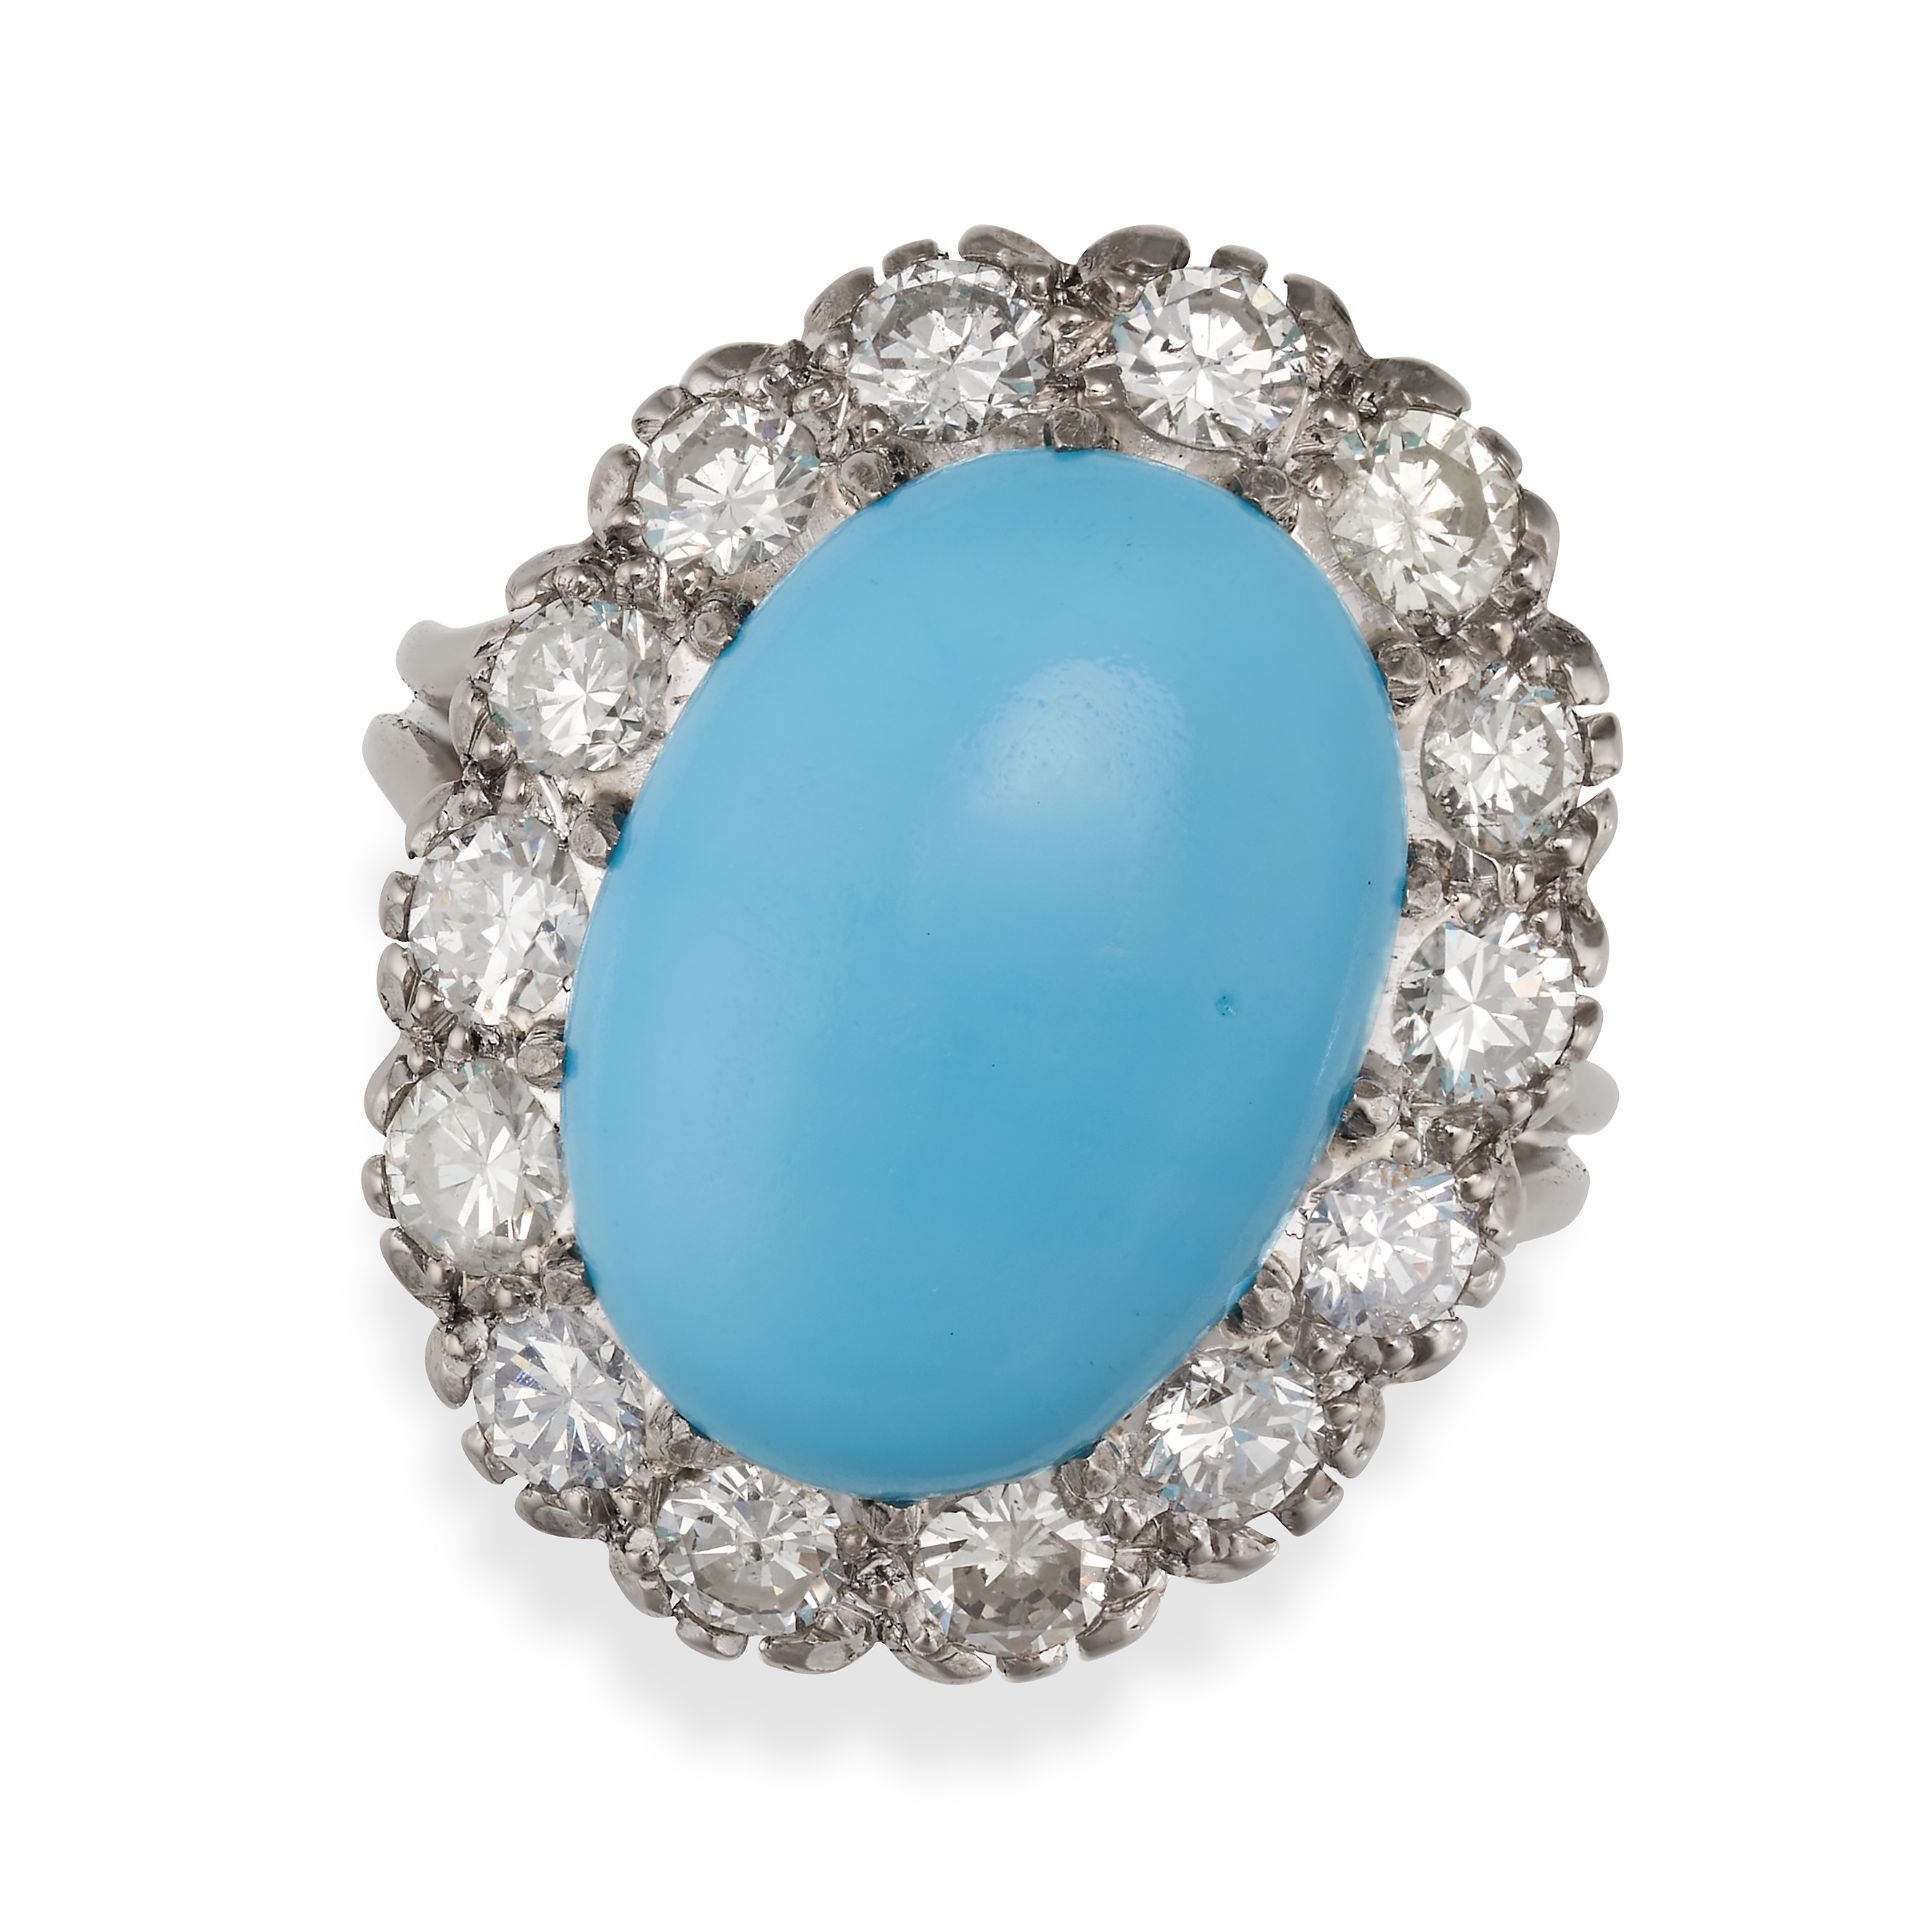 A RECONSTITUTED TURQUOISE AND DIAMOND CLUSTER RING in 18ct white gold, set with a cabochon recons...